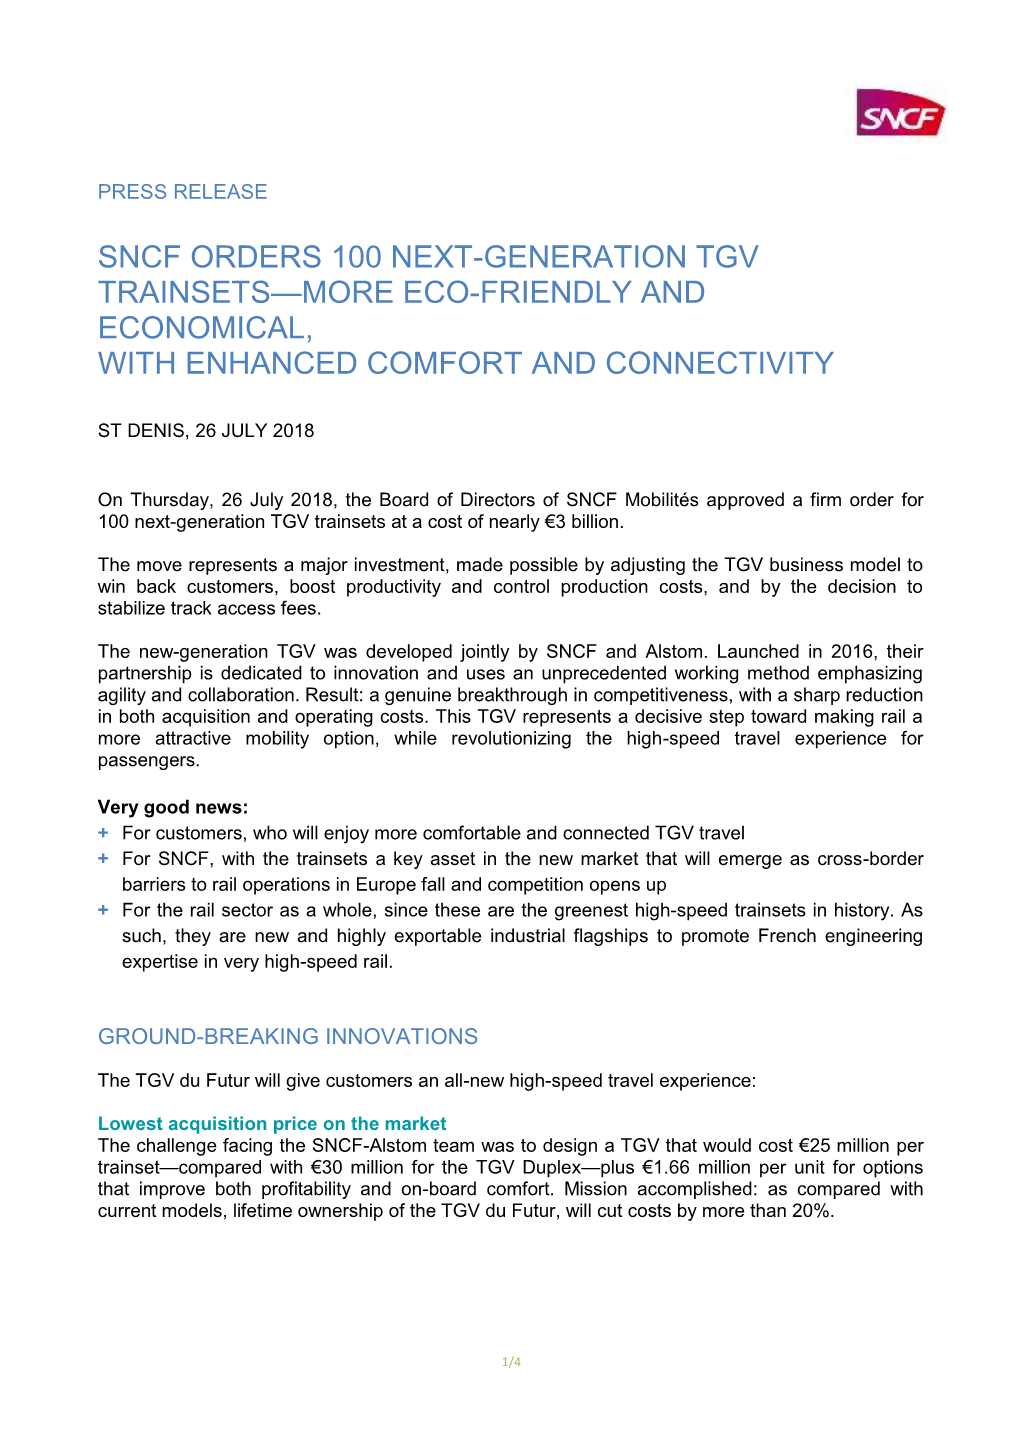 Sncf Orders 100 Next-Generation Tgv Trainsets—More Eco-Friendly and Economical, with Enhanced Comfort and Connectivity